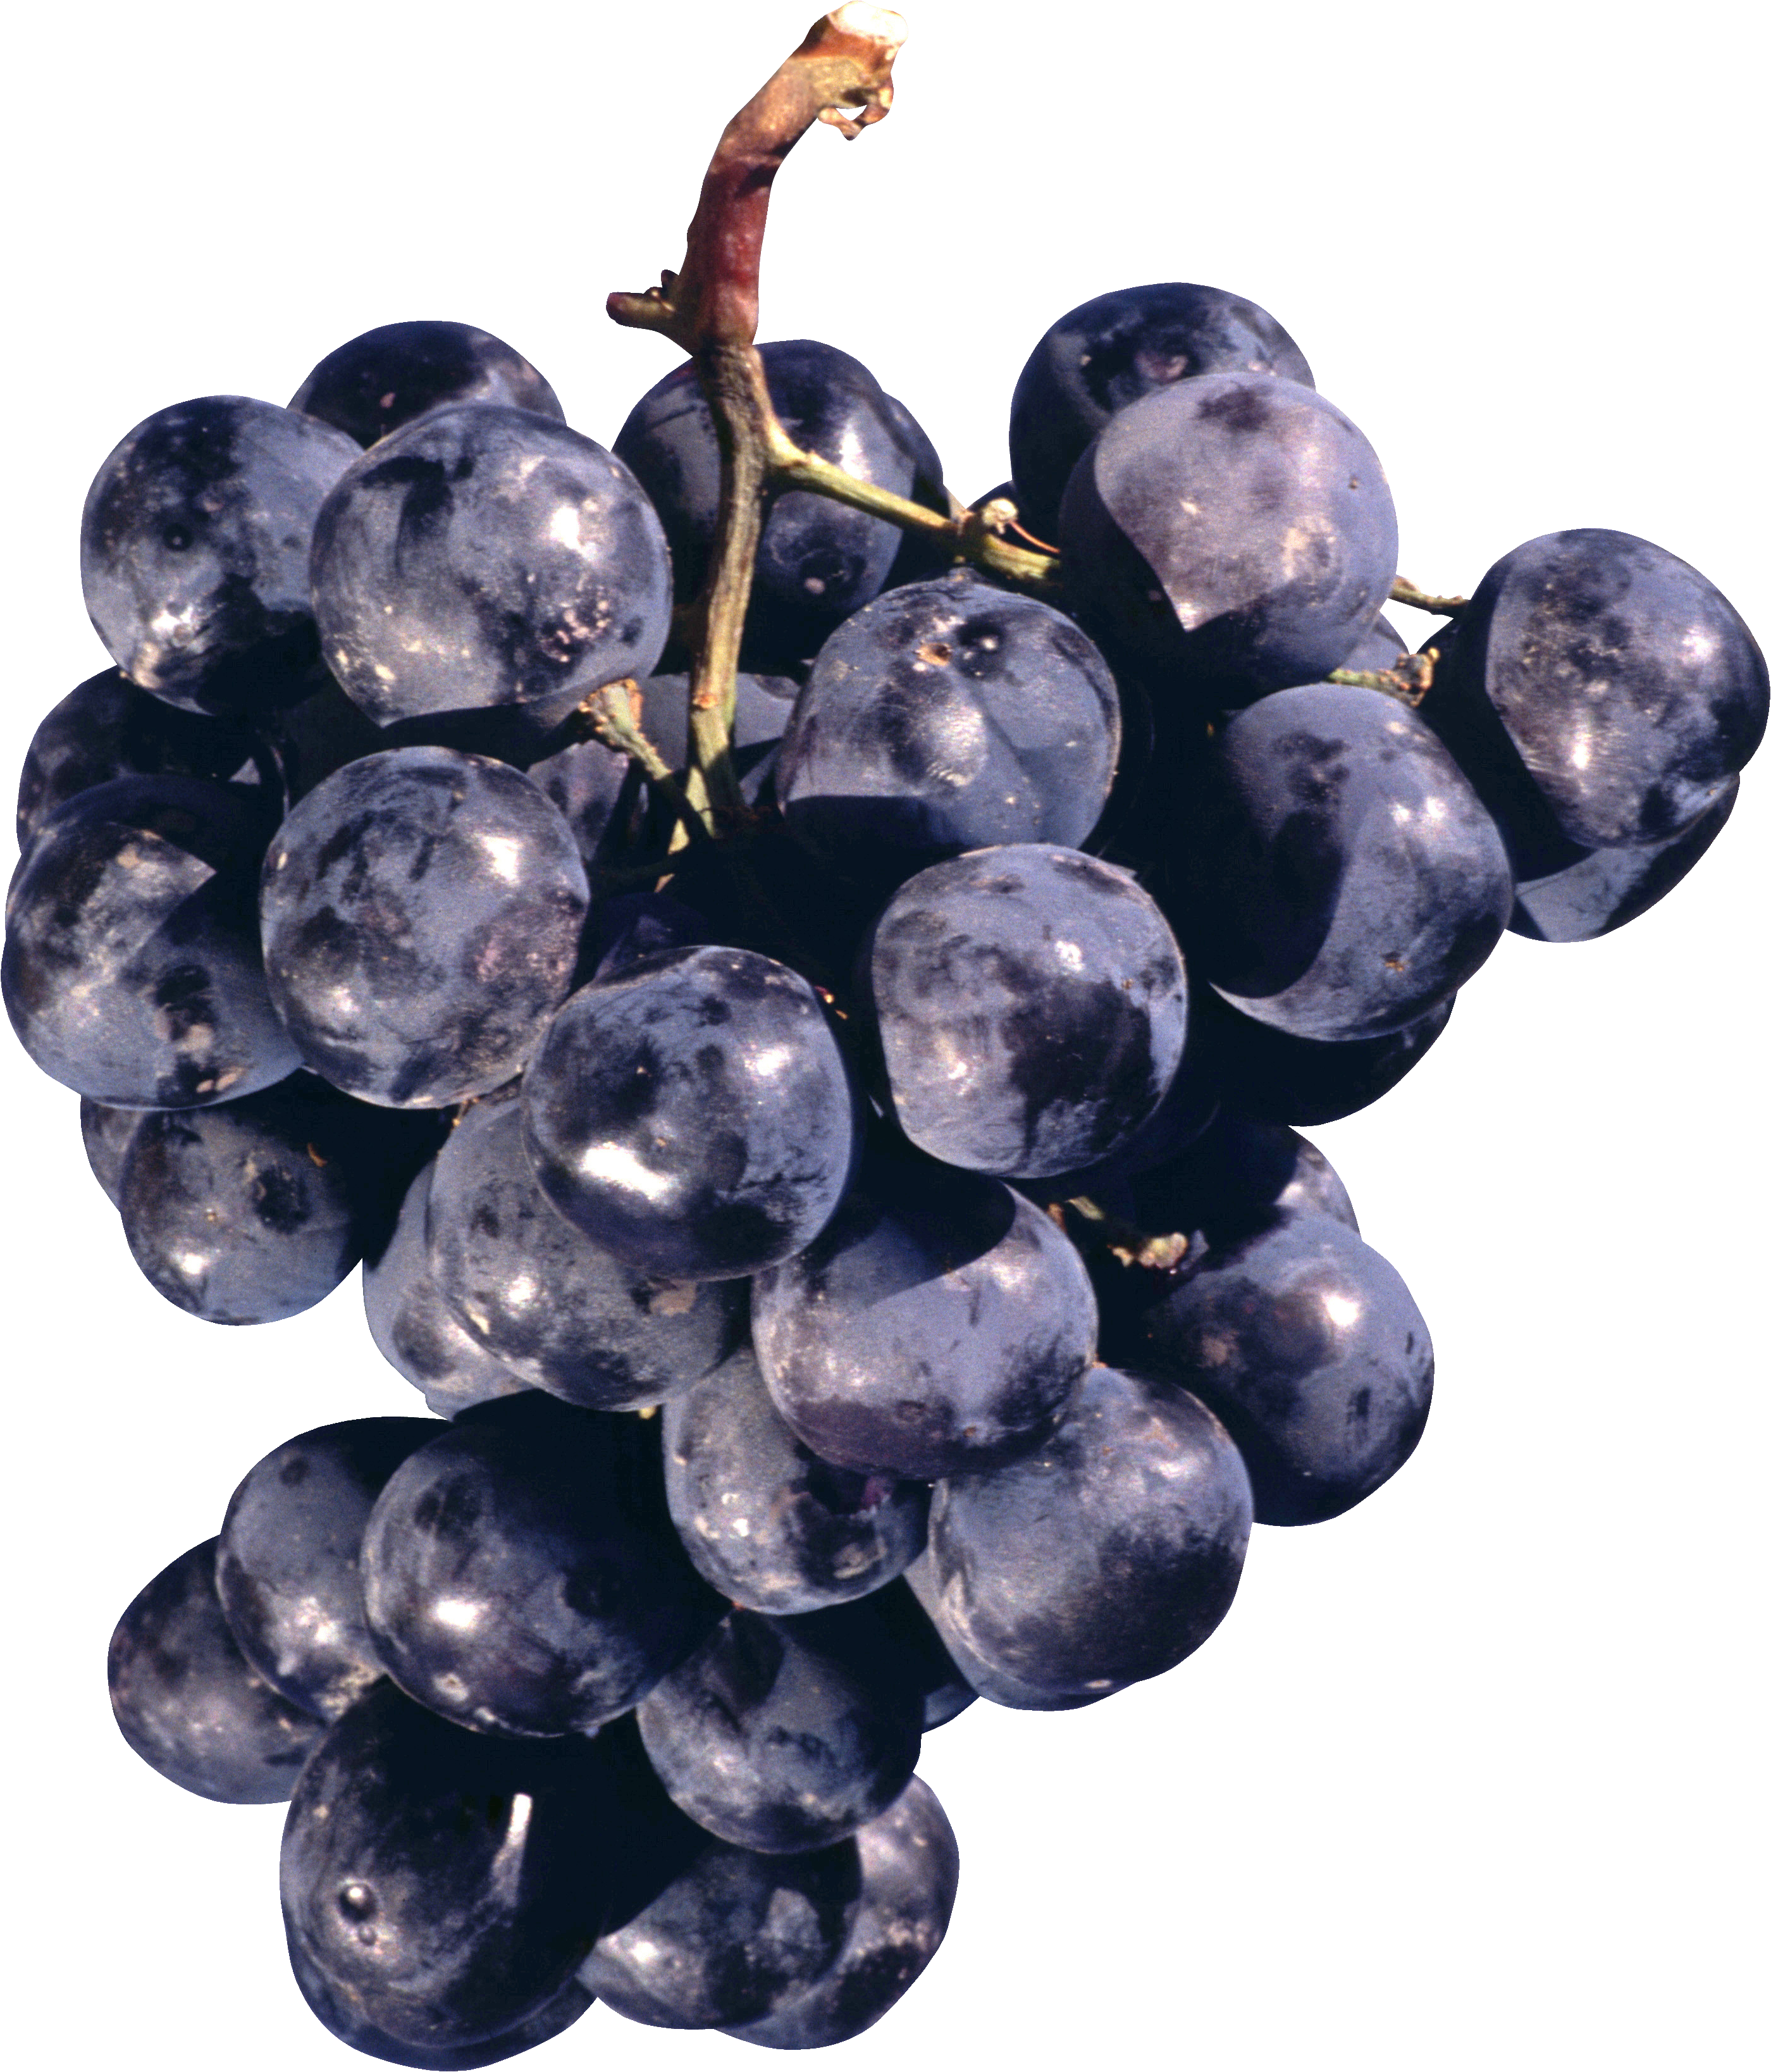 Black Blueberries Plums Fruits Clusters PNG